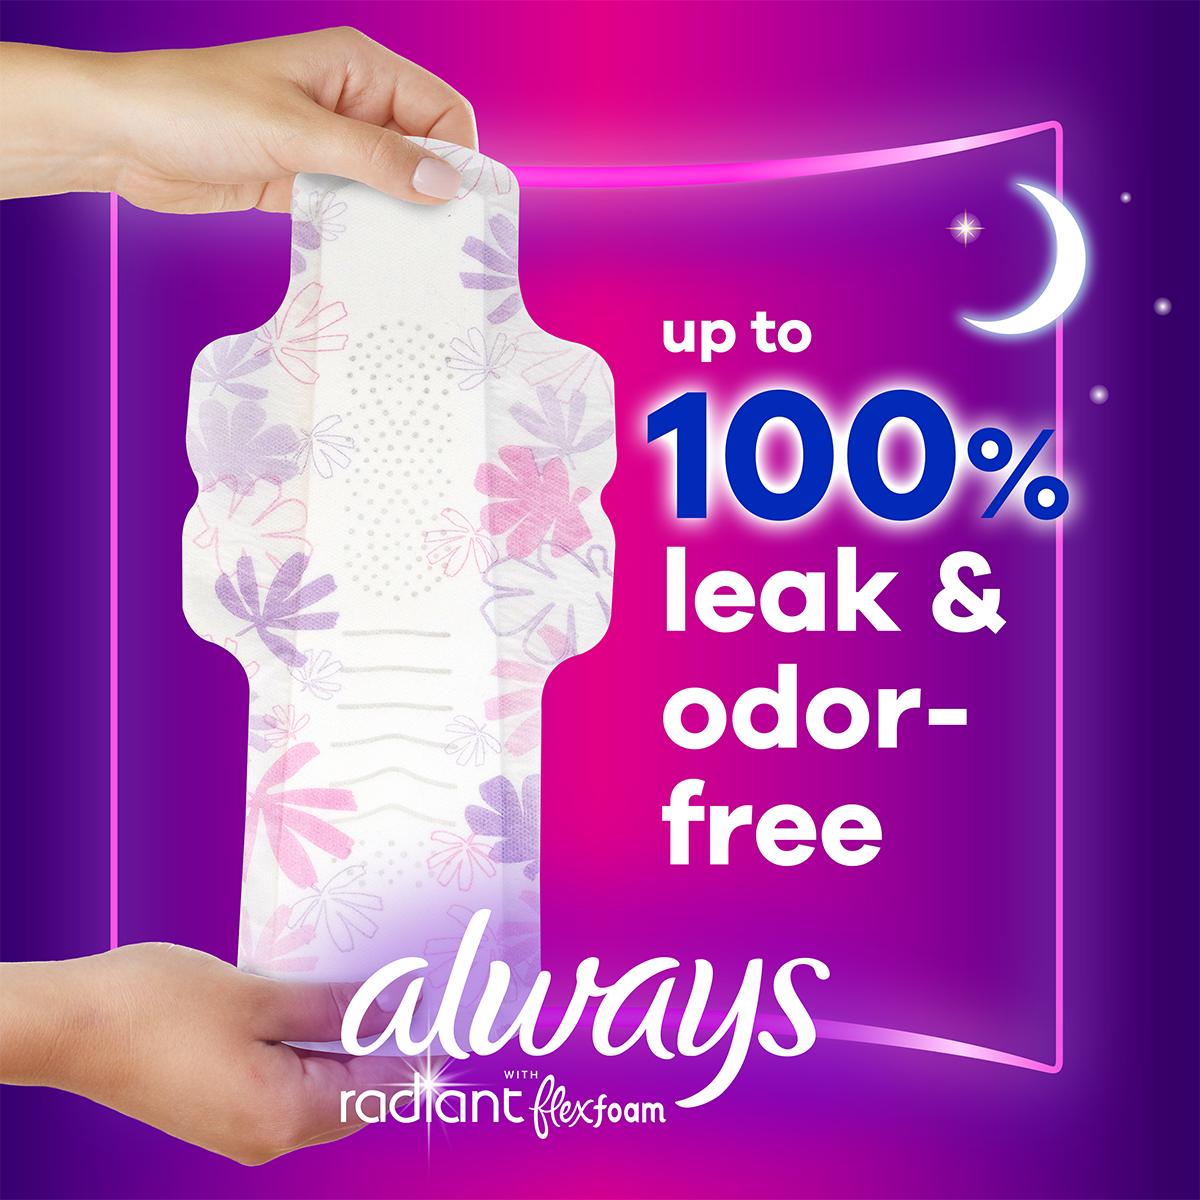  Always Maxi Feminine Pads for Women, Size 5 Extra Heavy  Overnight Absorbency, with Wings, Unscented, 36 Count : Health & Household